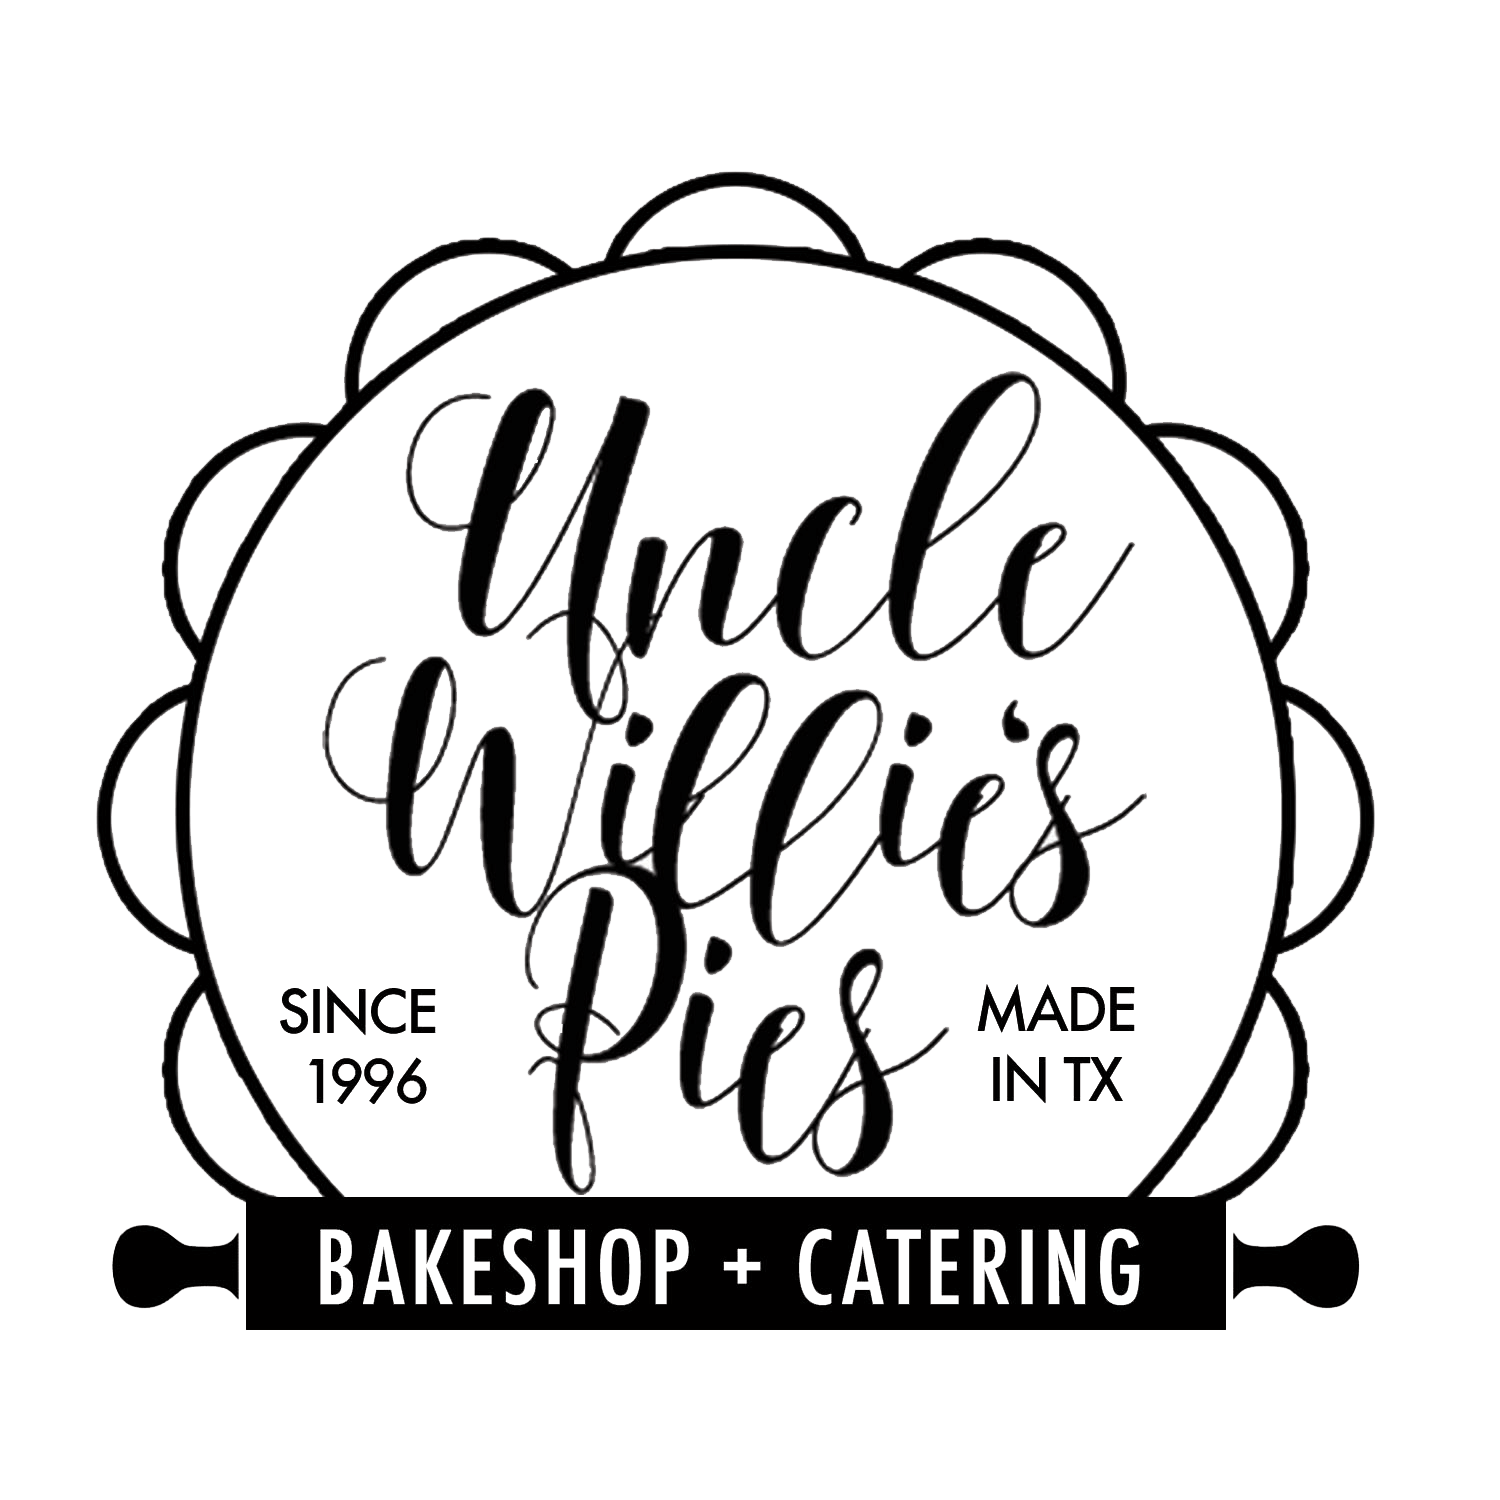 Uncle Willie's Pies Bakeshop + Catering